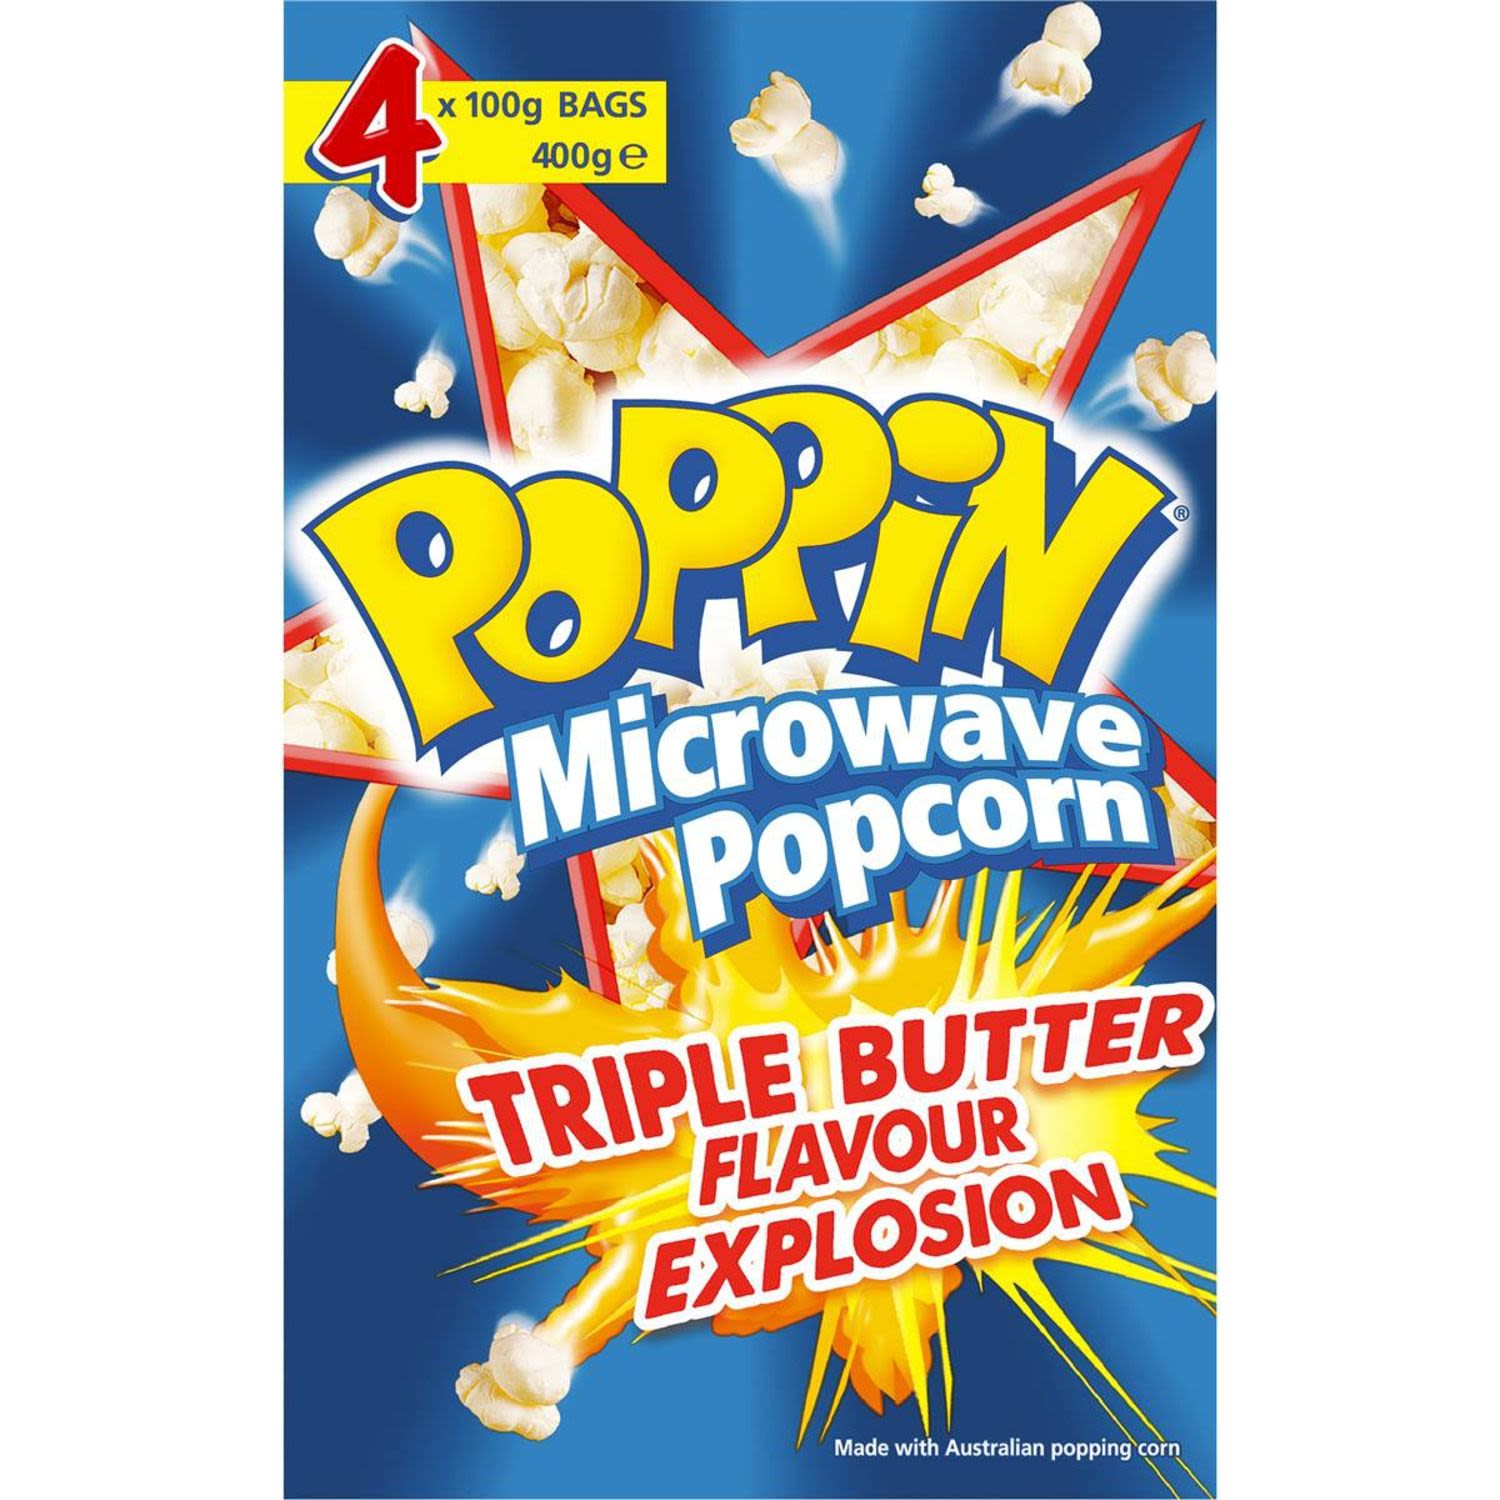 Poppin Microwave Popcorn Triple Butter Flavour, 4 Each